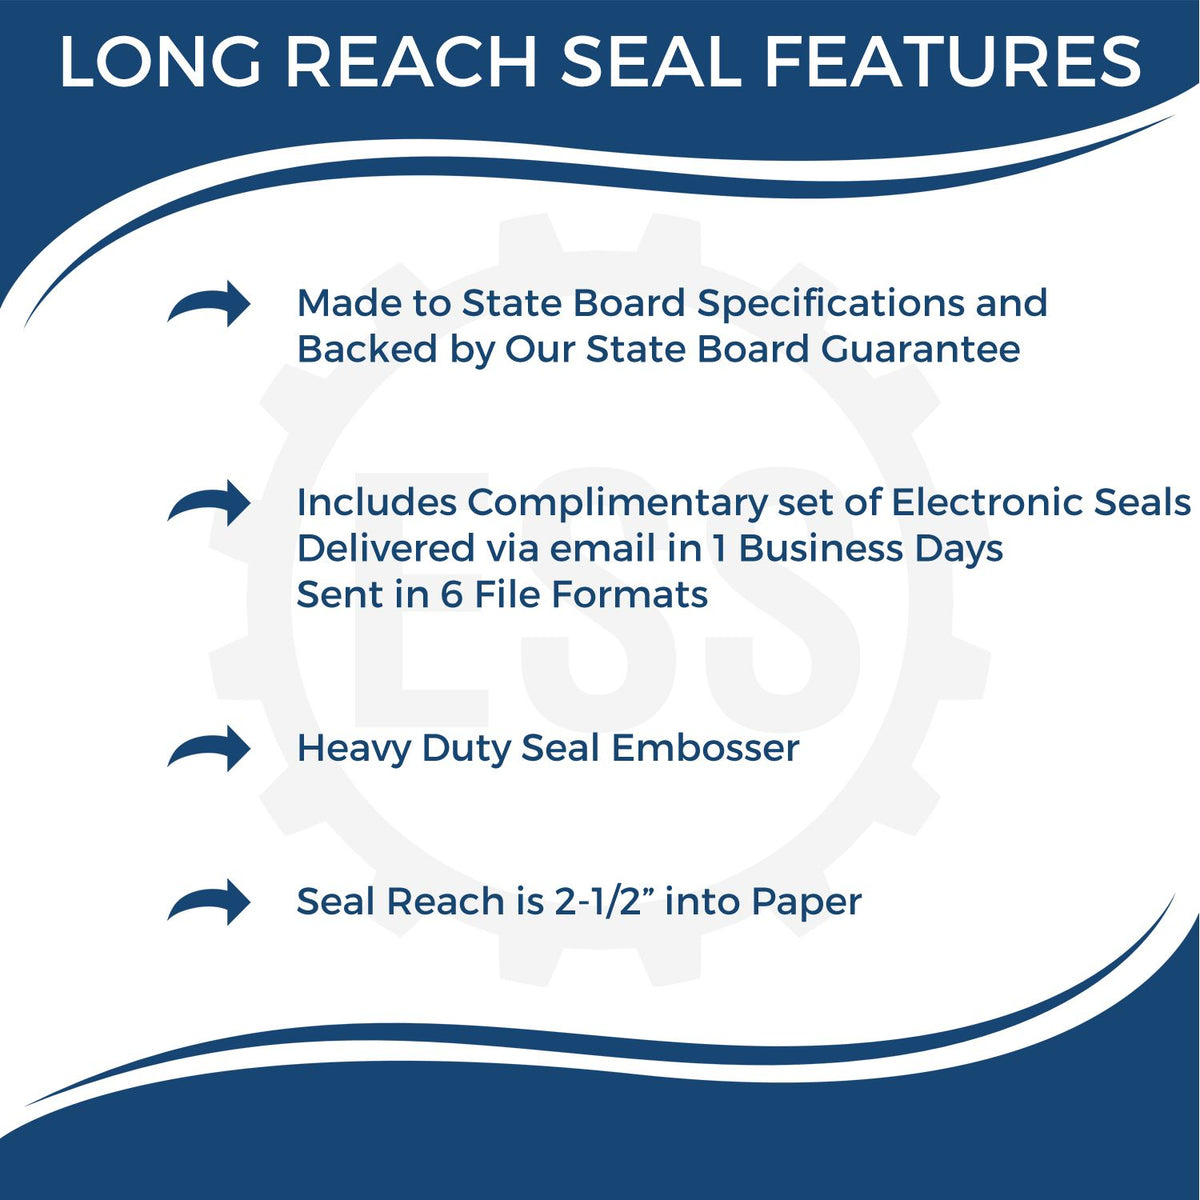 A picture of an infographic highlighting the selling points for the Long Reach Kansas Geology Seal